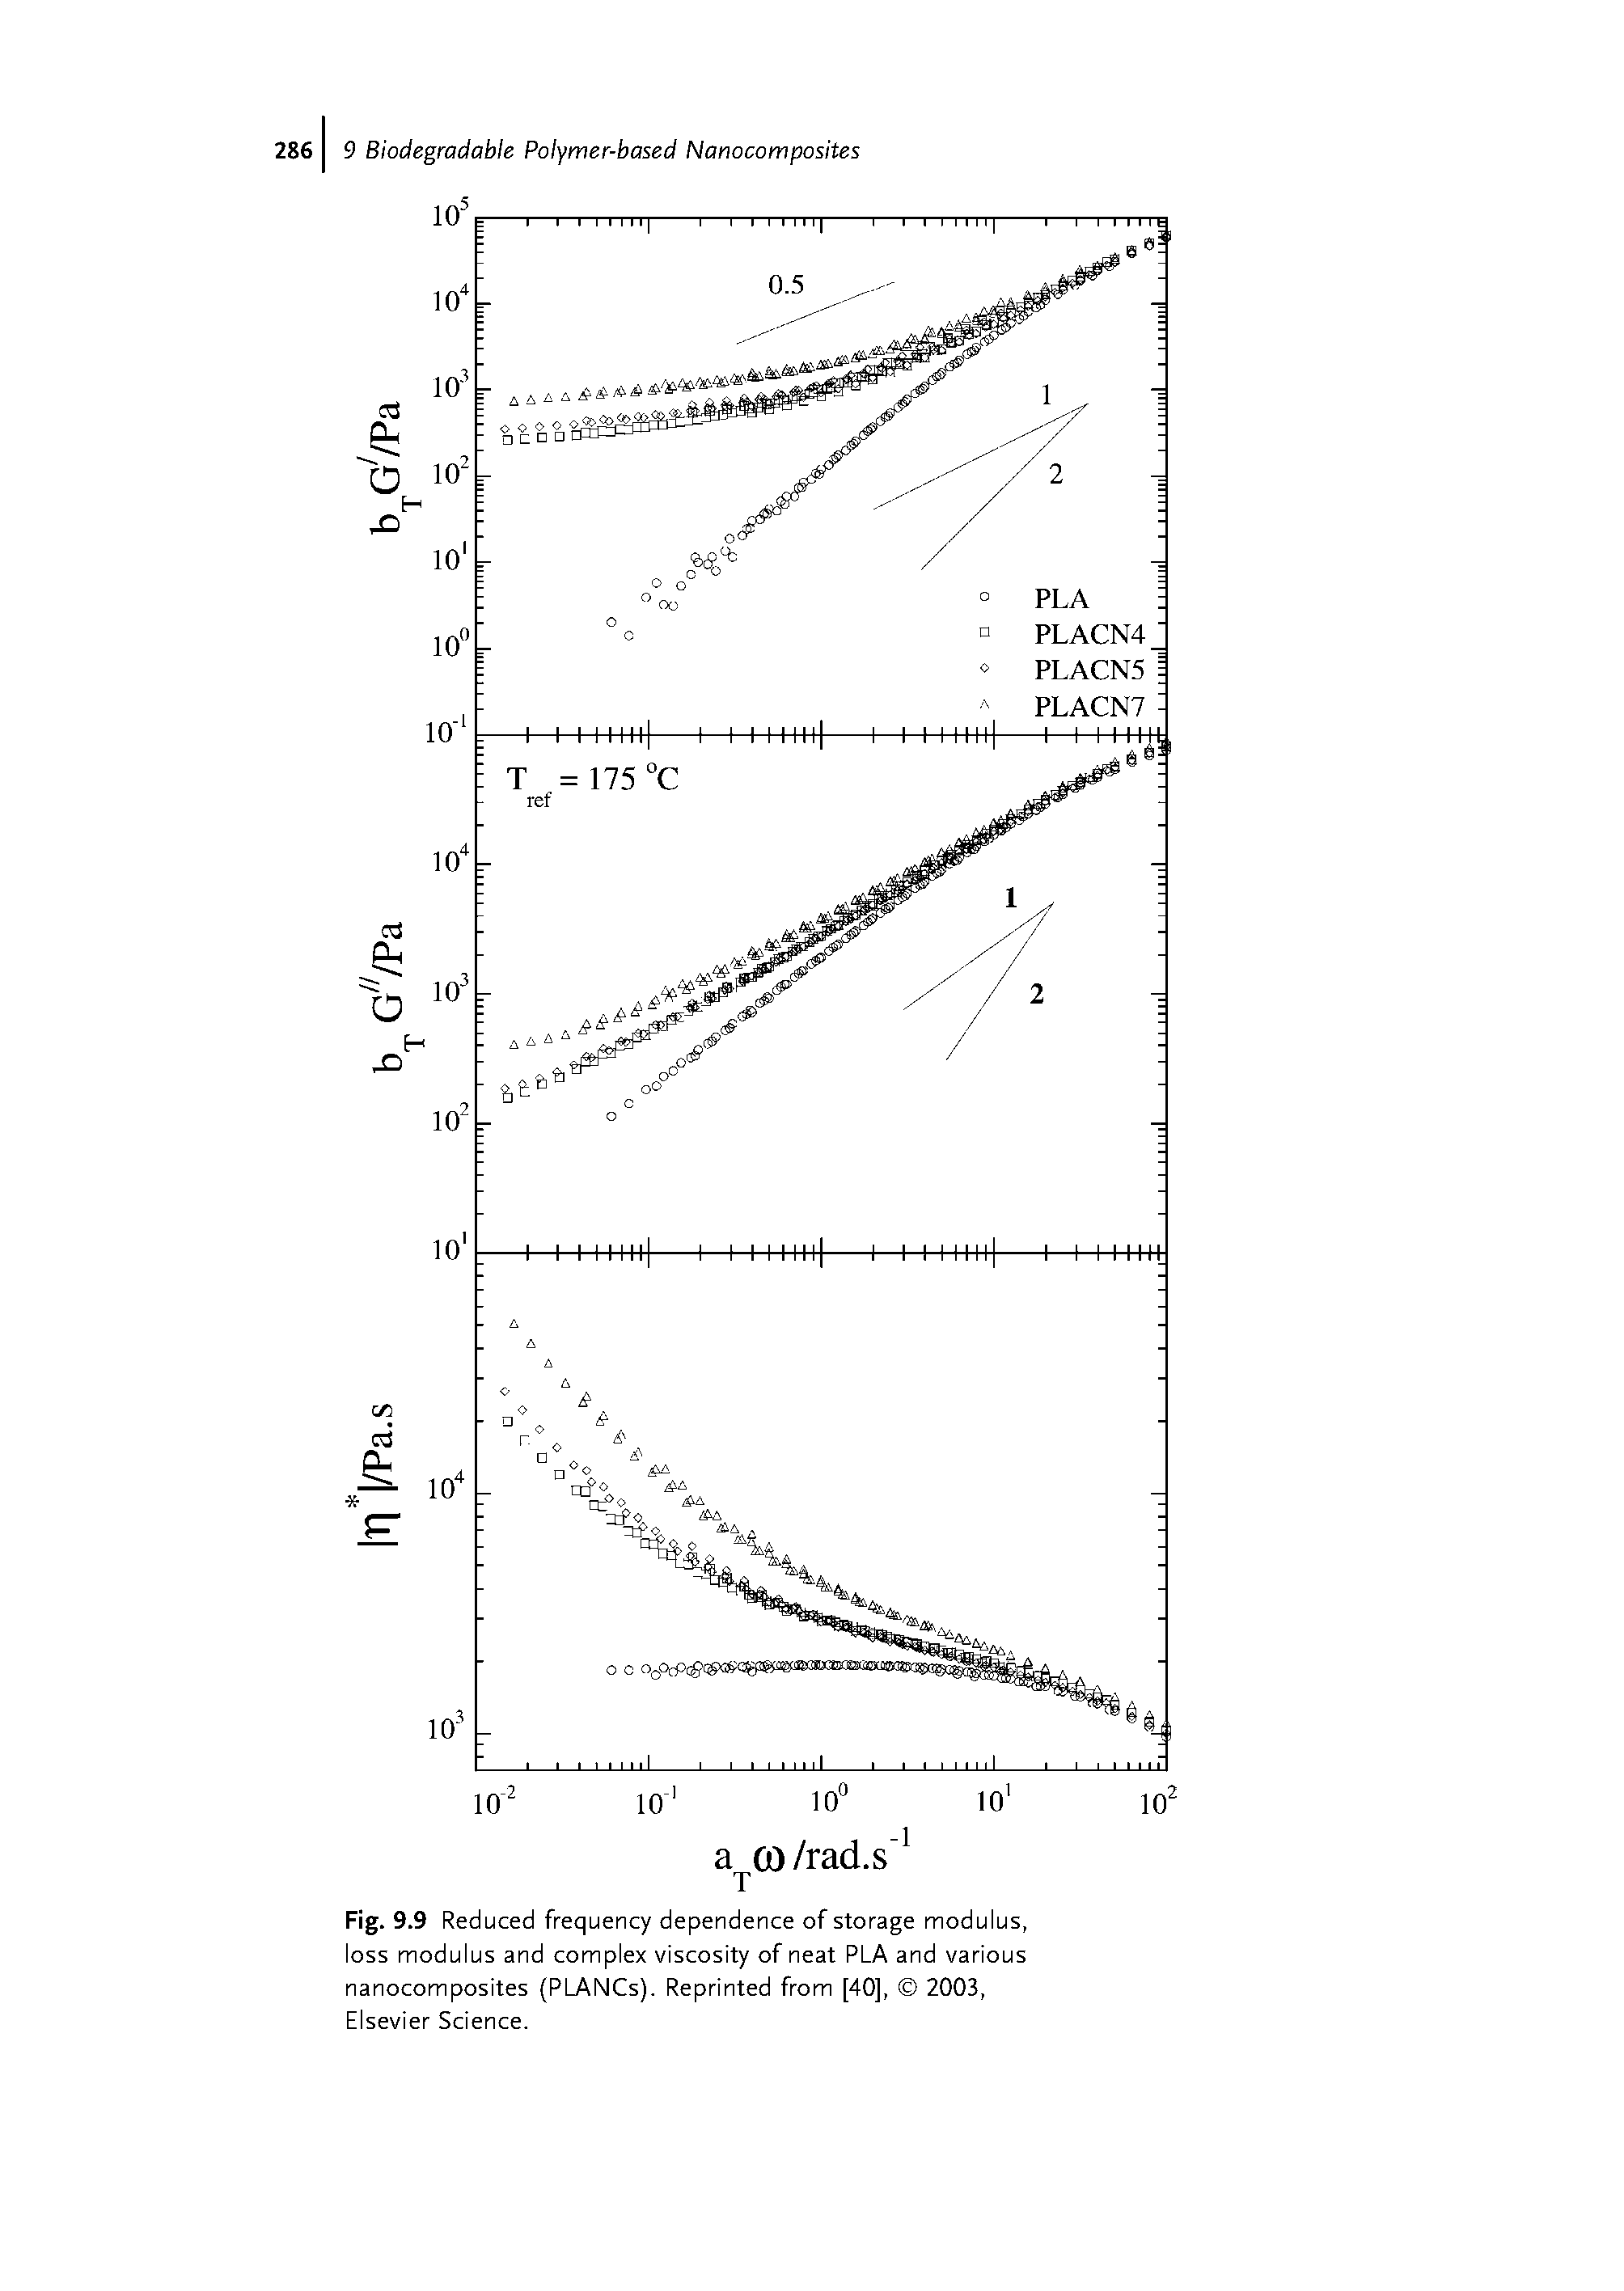 Fig. 9.9 Reduced frequency dependence of storage modulus, loss modulus and complex viscosity of neat PLA and various nanocomposites (PLANCs). Reprinted from [40], 2003, Elsevier Science.